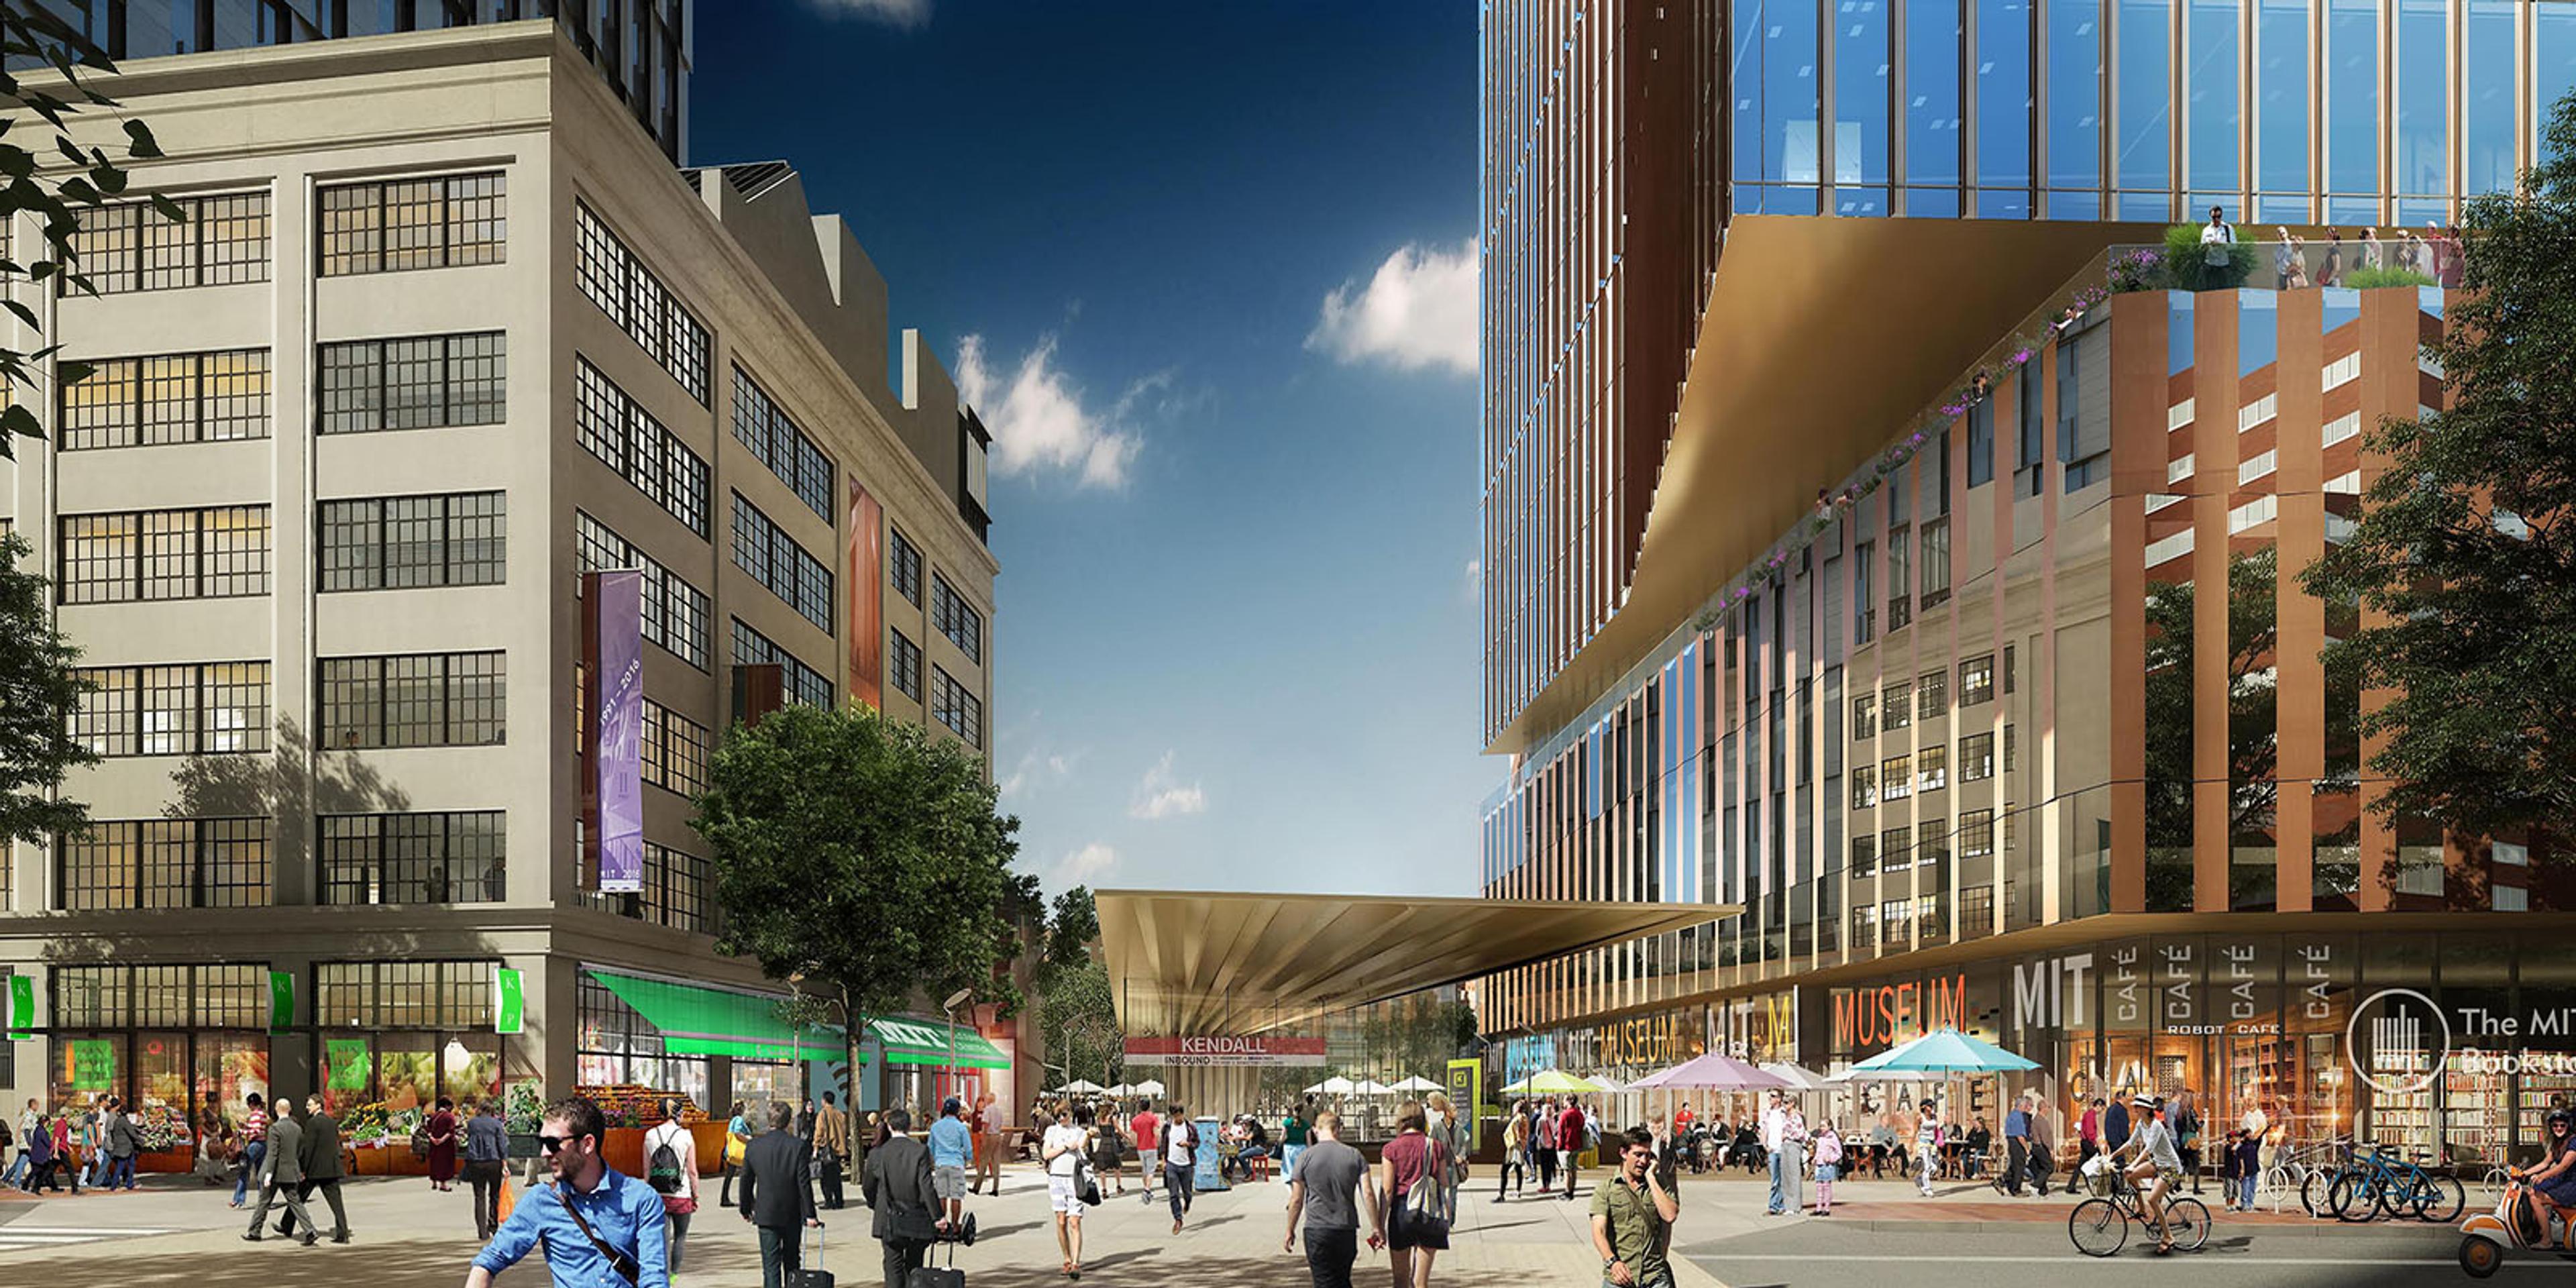 Rendering of Kendall Square with modern buildings and crowds of visitors.